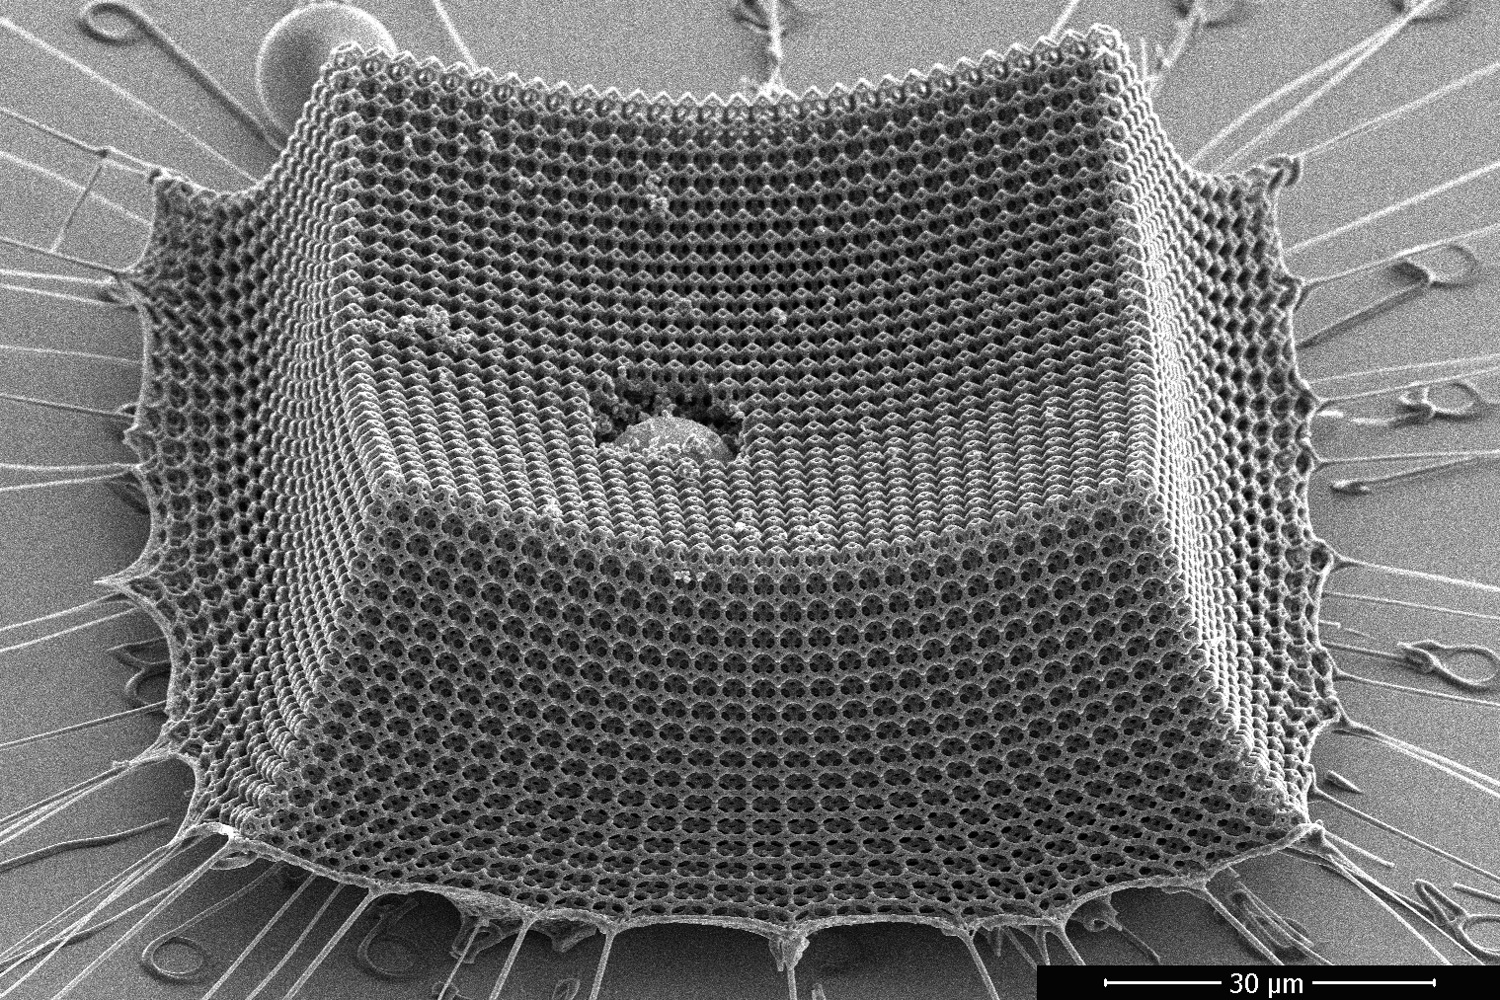 Ultralight material withstands supersonic microparticle impacts, MIT News